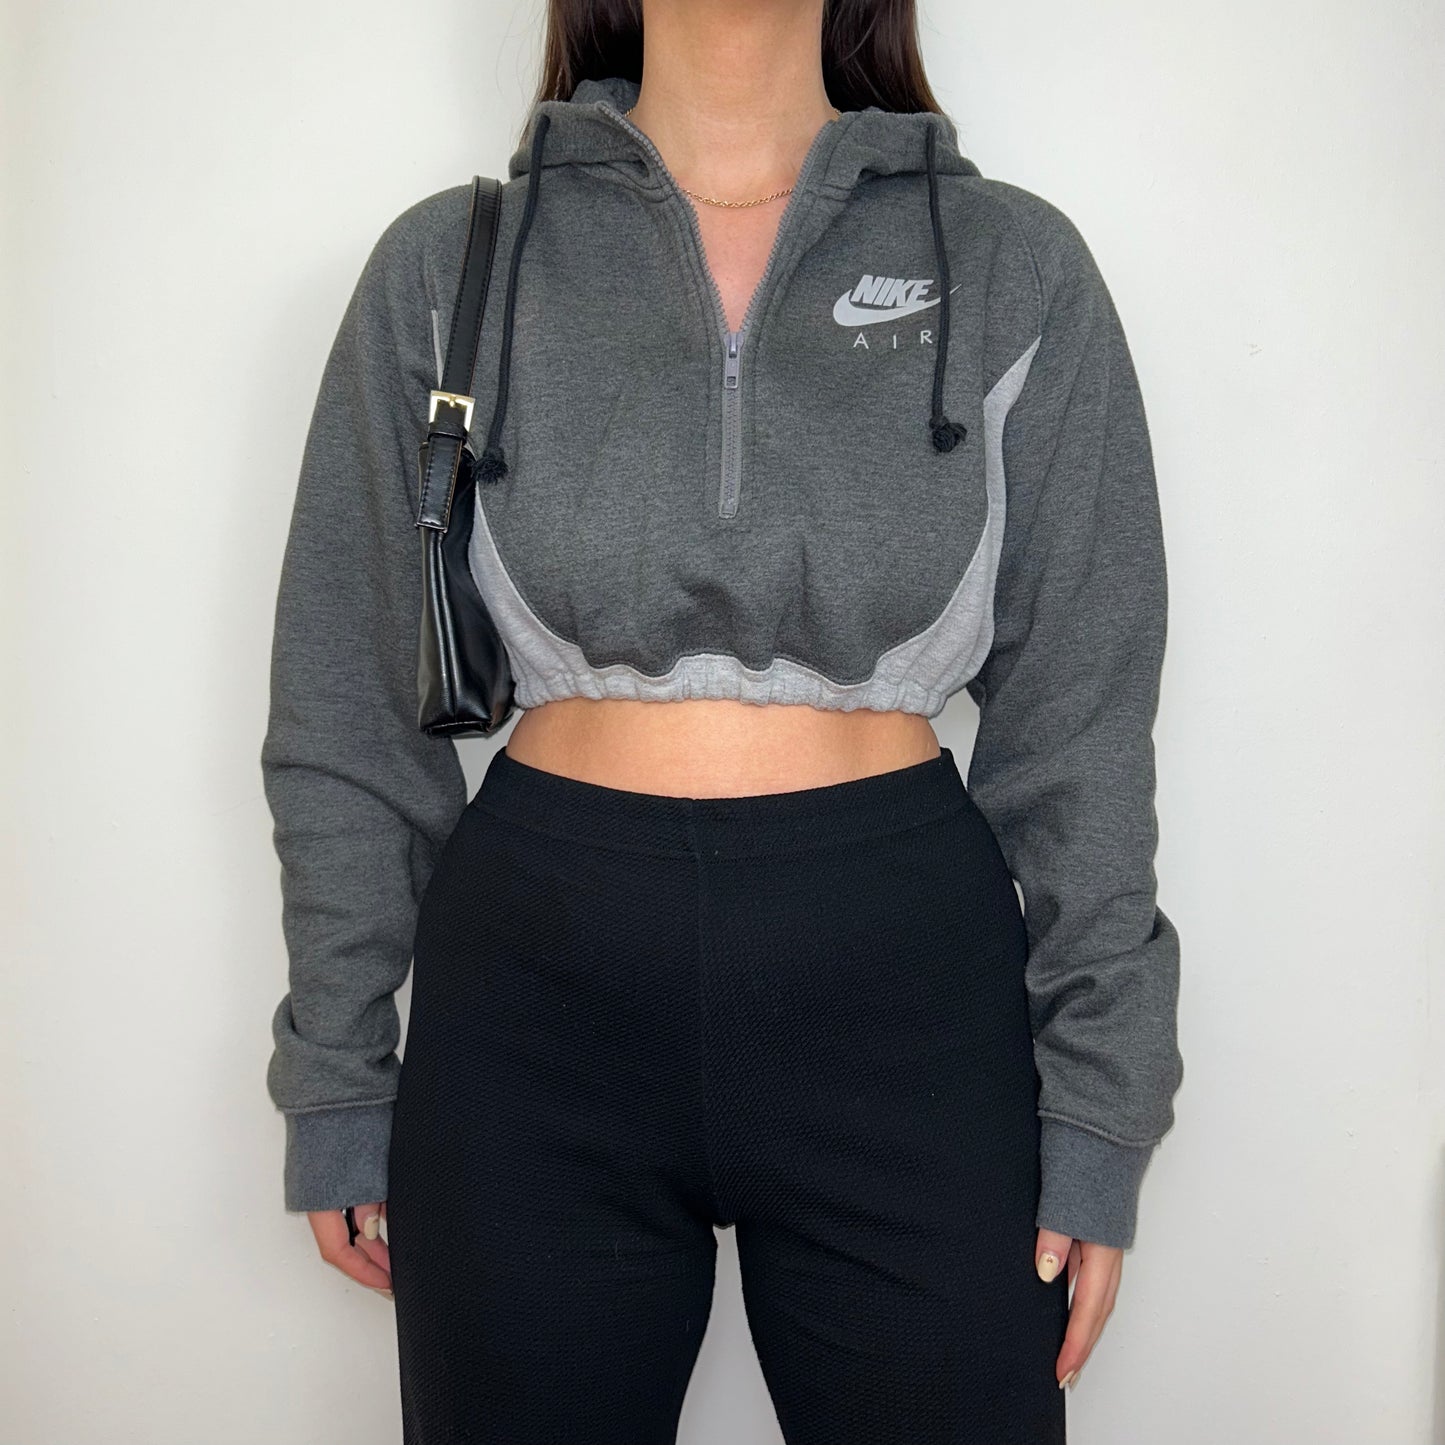 grey 1/4 zip cropped hoodie with grey nike air logo shown on a model wearing black trousers and a black shoulder bag